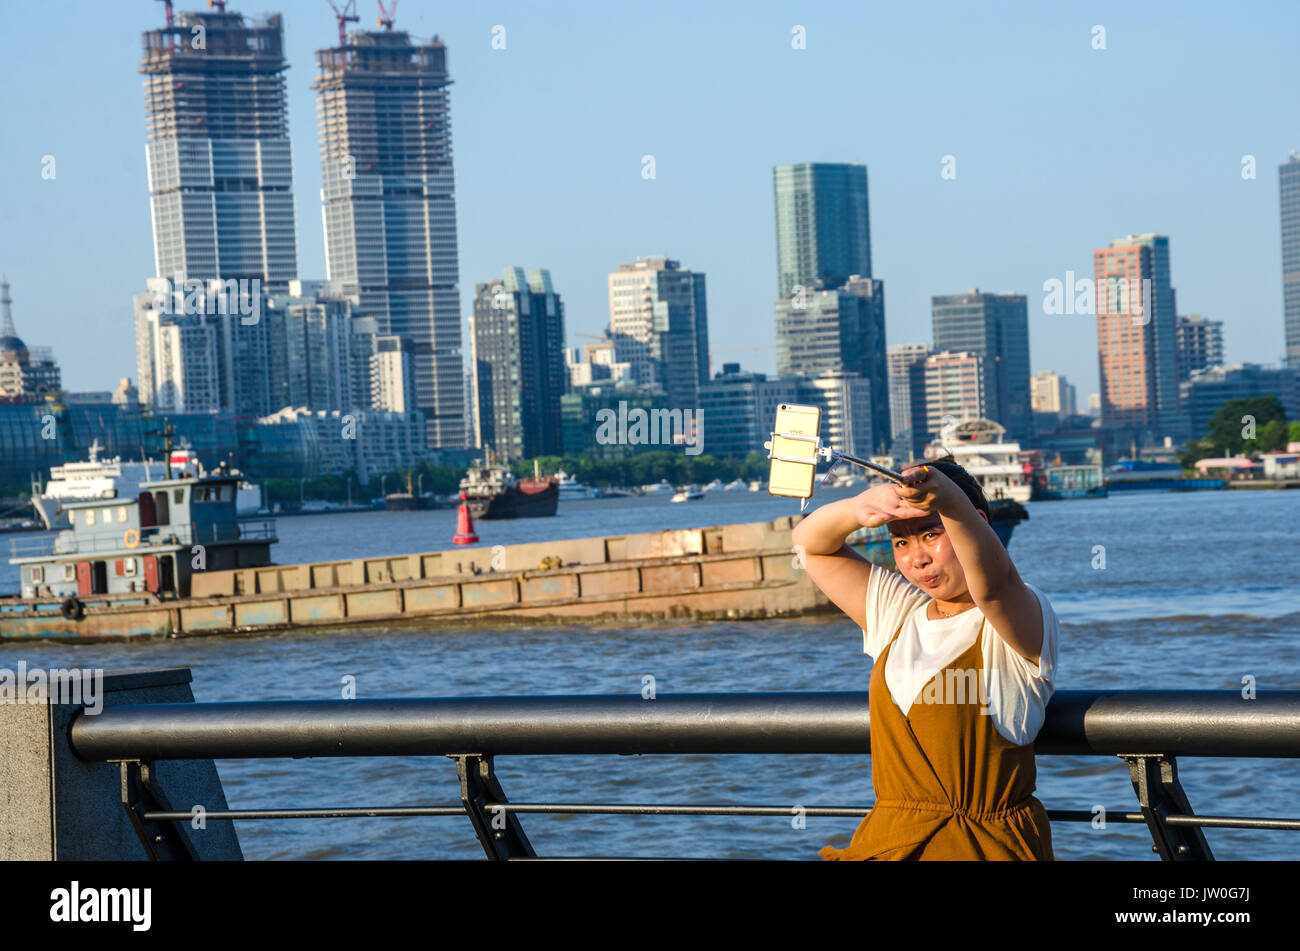 A lady takes a selfie with the Huangpu River in Shanghai, China in the background. Stock Photo